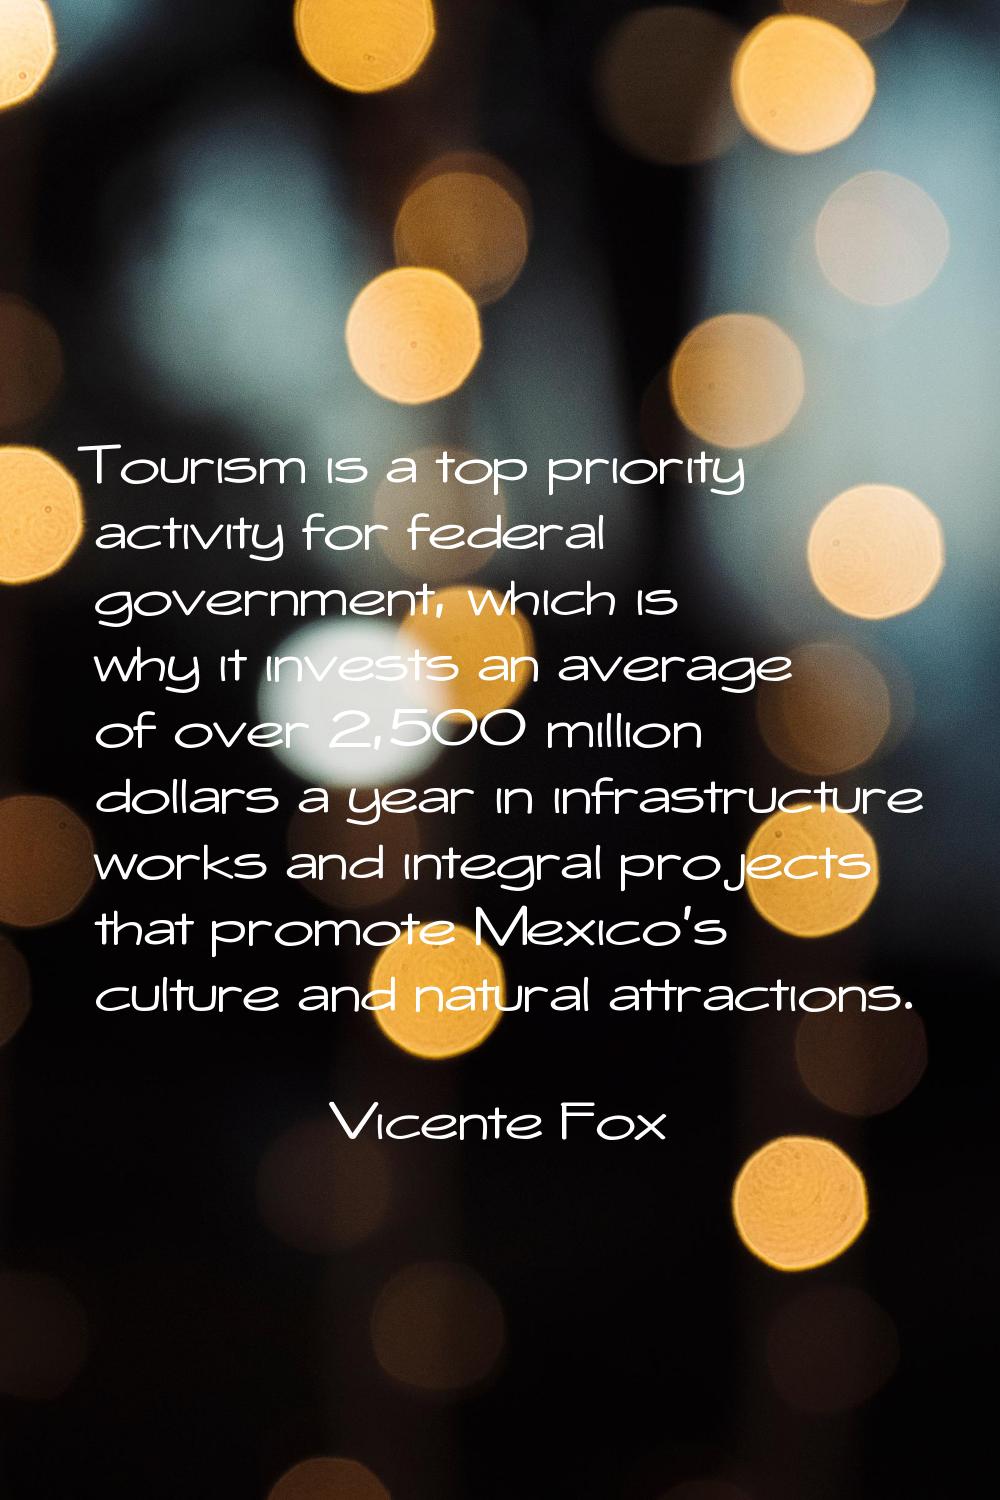 Tourism is a top priority activity for federal government, which is why it invests an average of ov